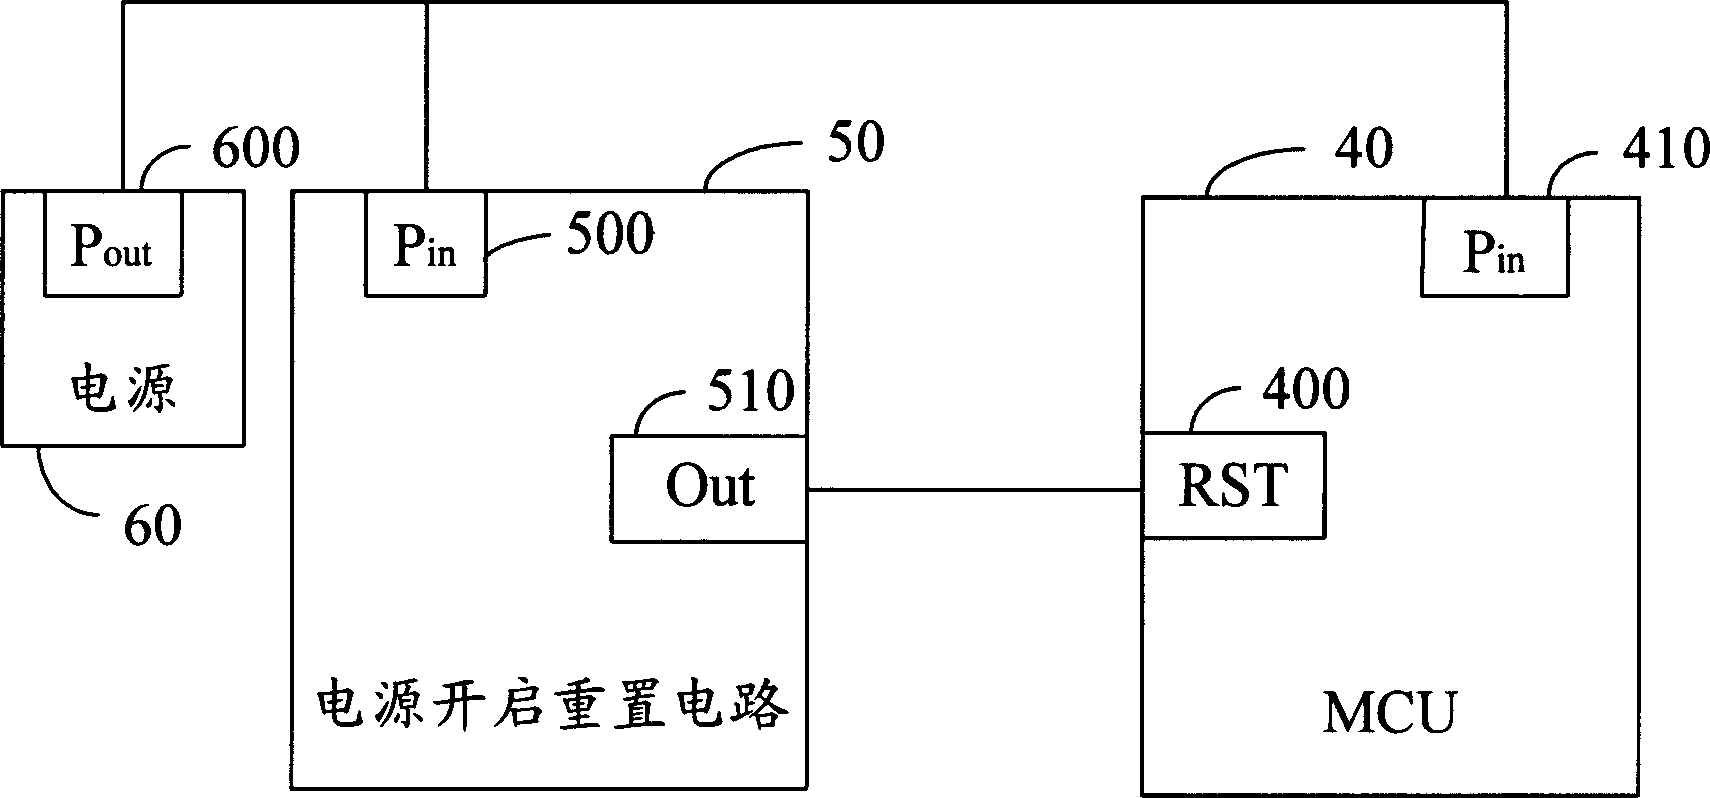 External reset switch and rest circuit